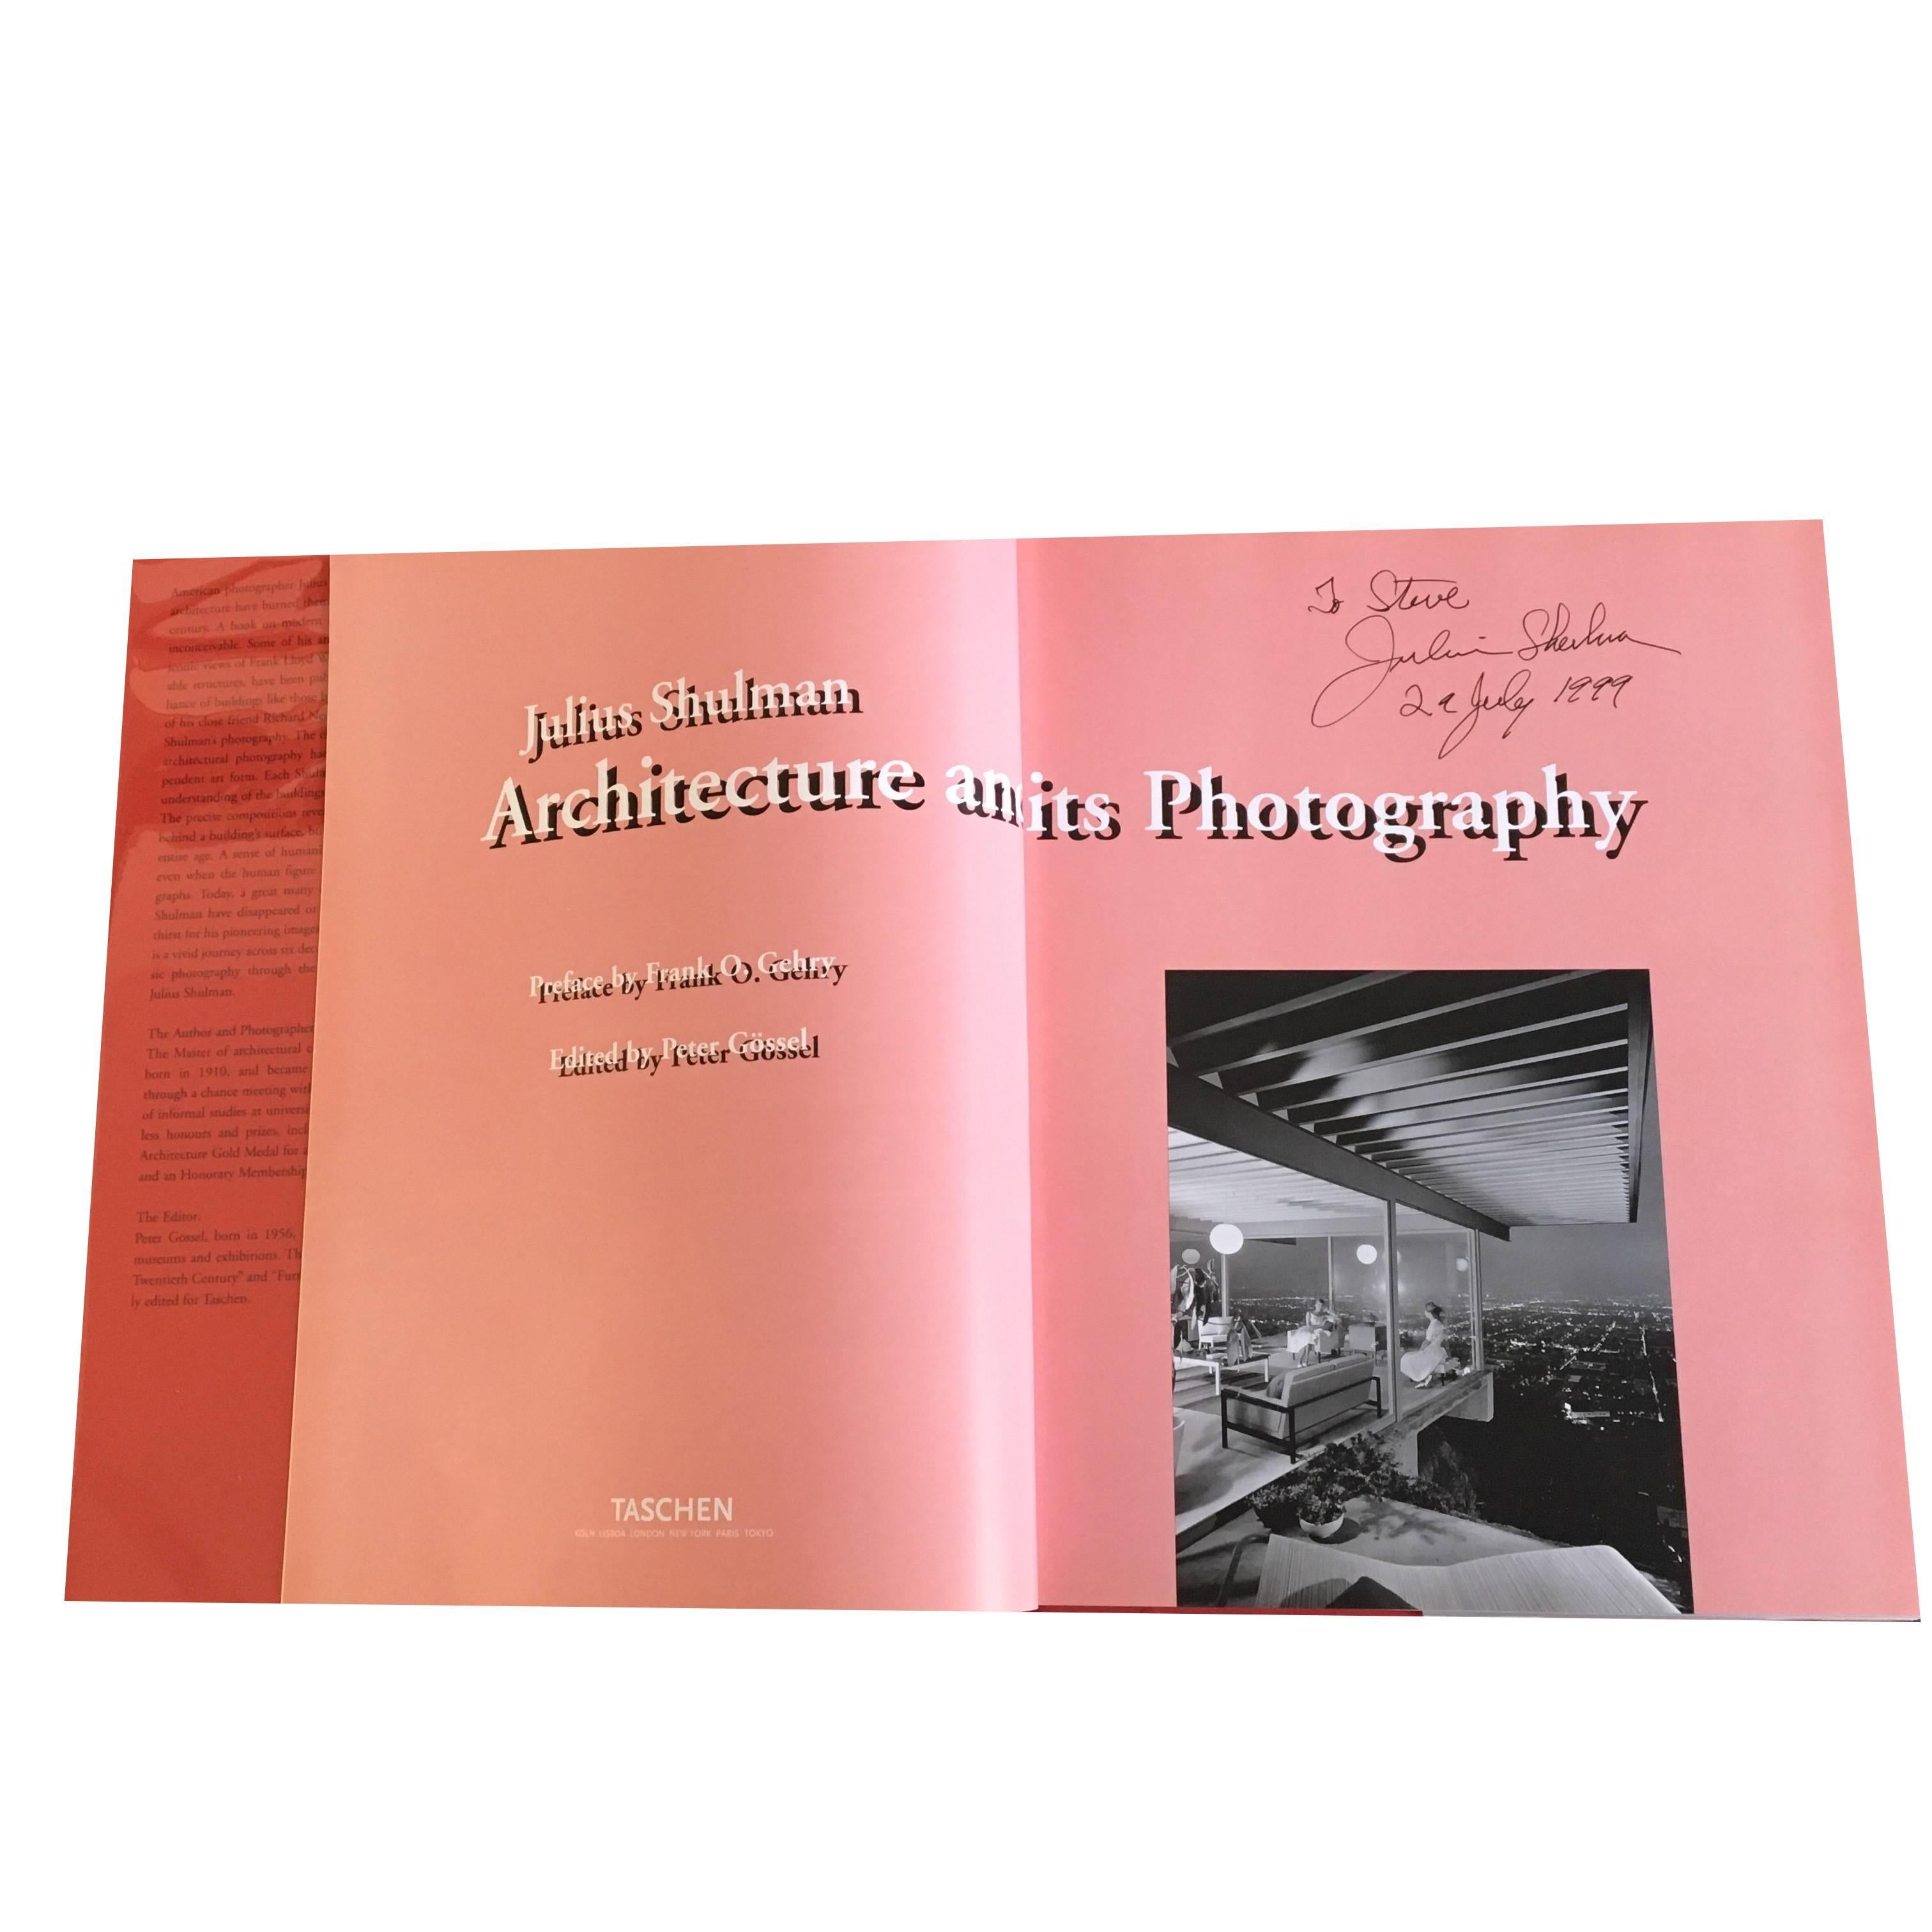 Julius Shulman Architecture and it's photography book published by Taschen. Preface by Frank O. Gehry. Signed by Julius Shulman in 1999. Excellent condition.